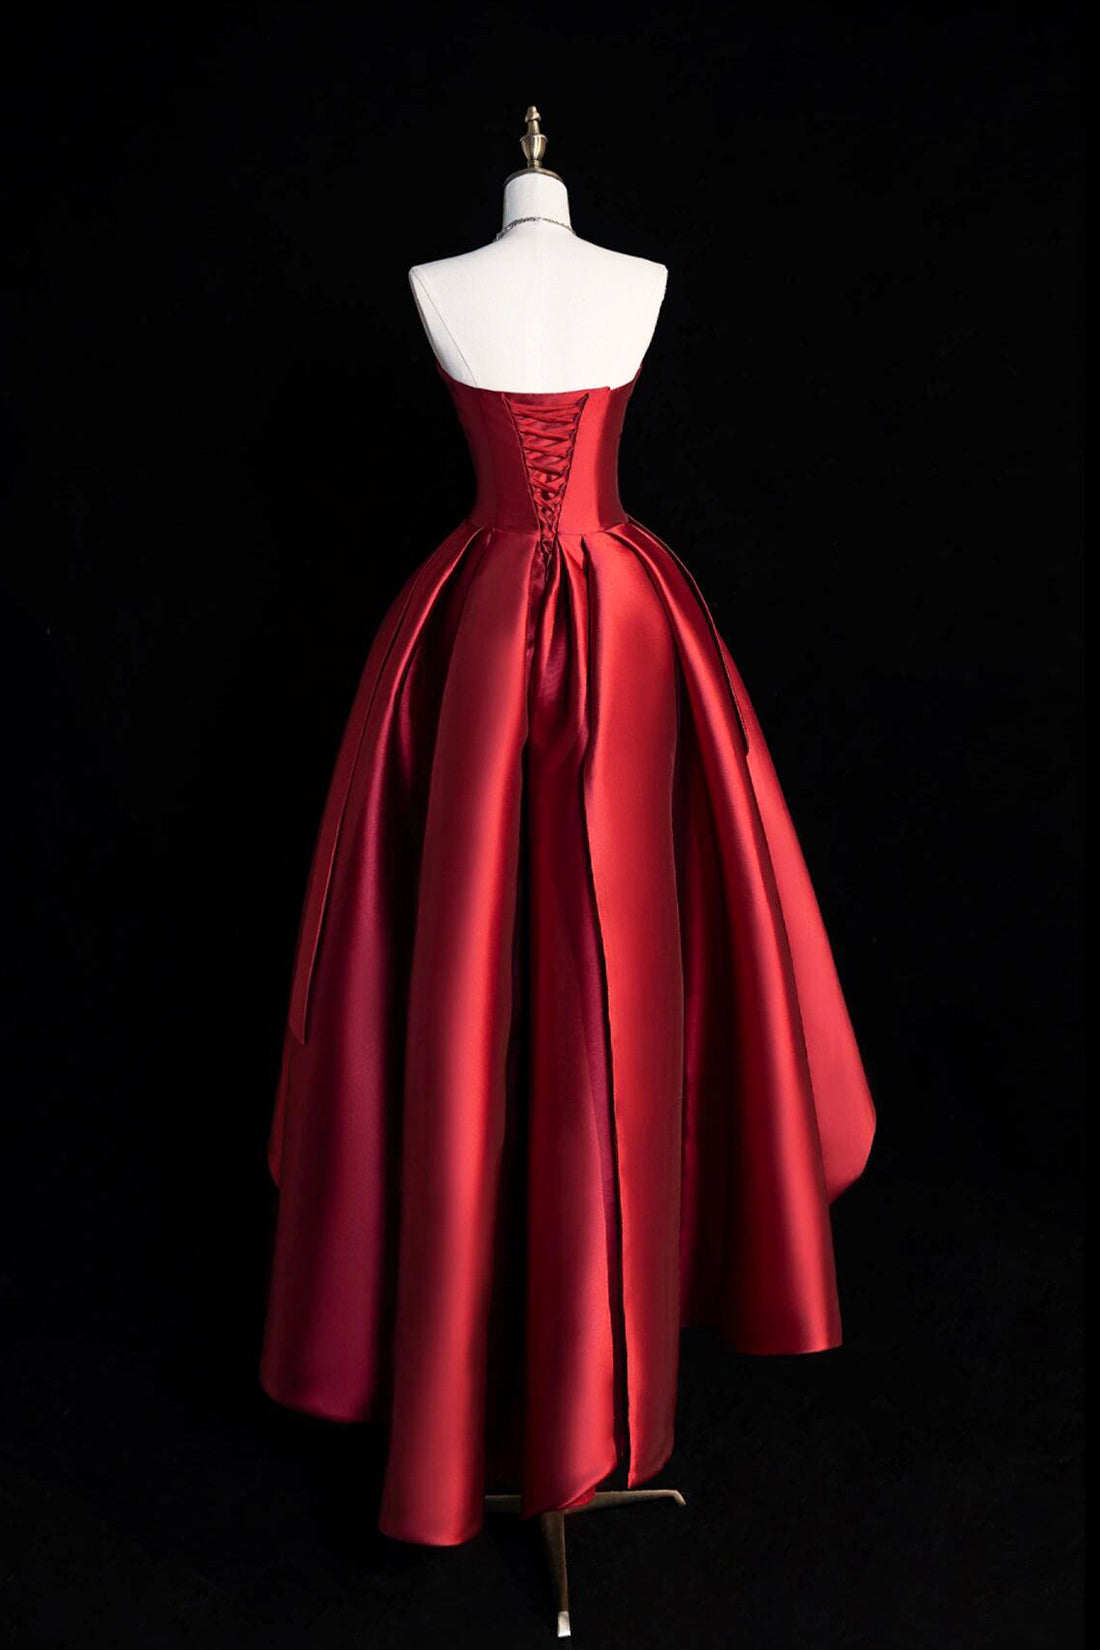 A-Line Satin Short Prom Dress, Burgundy Strapless High Low Party Dress